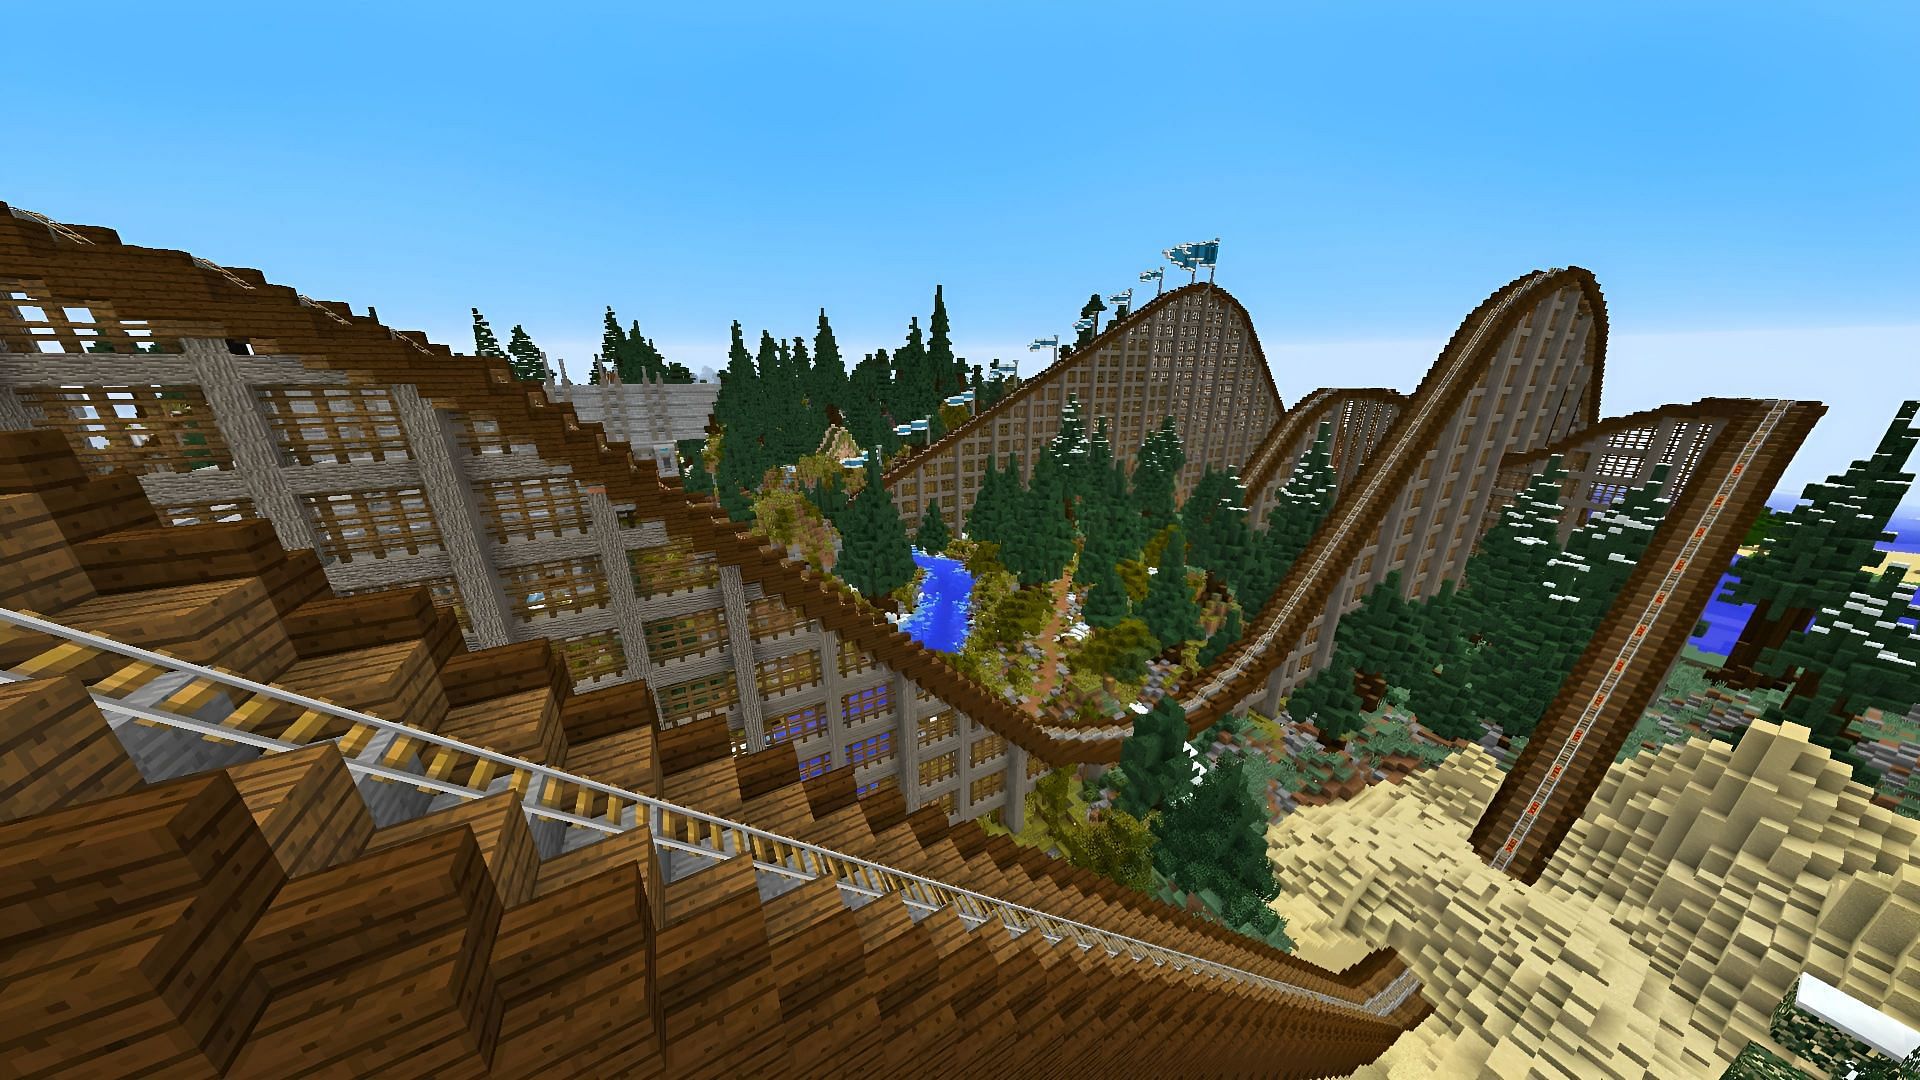 Rollercoasters are one of the most popular structures to build in Minecraft (Image via Reddit/u/GoodTimesWithScar)